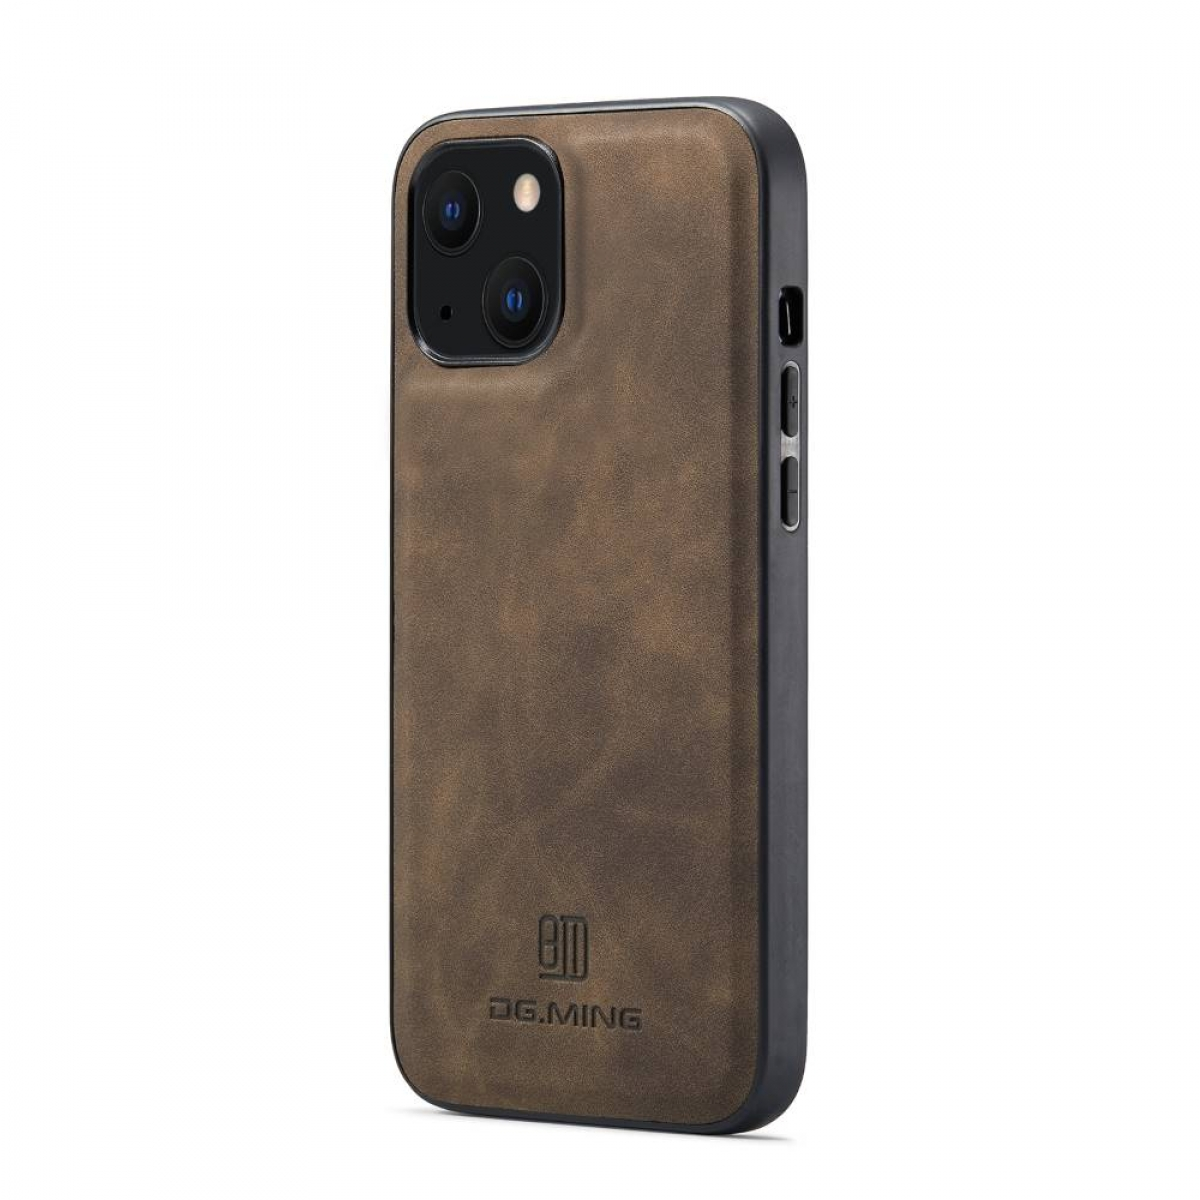 DG MING 13 Backcover, Coffee 2in1, iPhone M2 Mini, Apple